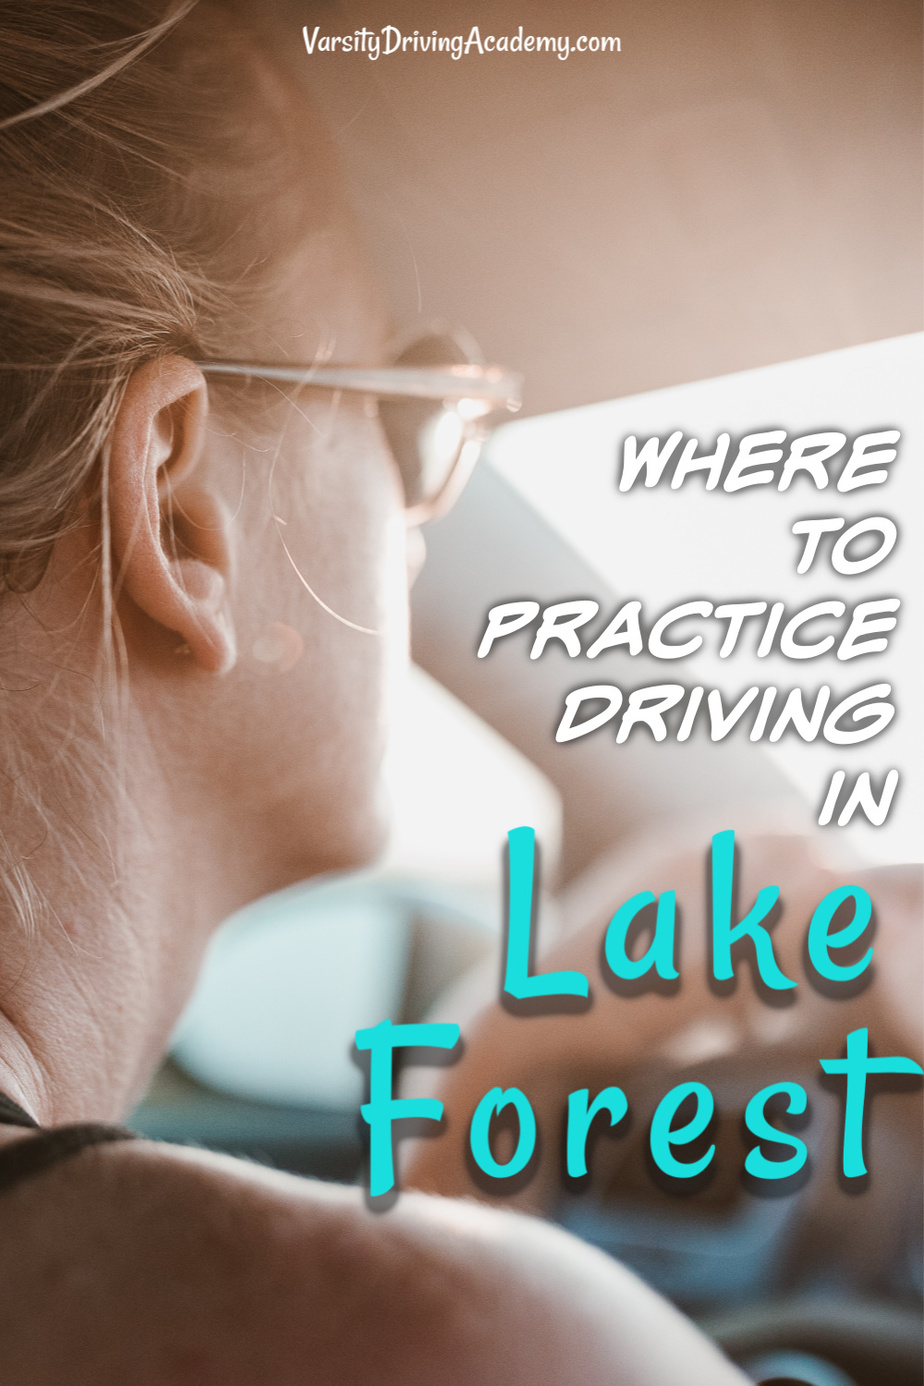 It is important for teens to find safe places to practice driving in Lake Forest if they want to ensure they get enough driving practice done.